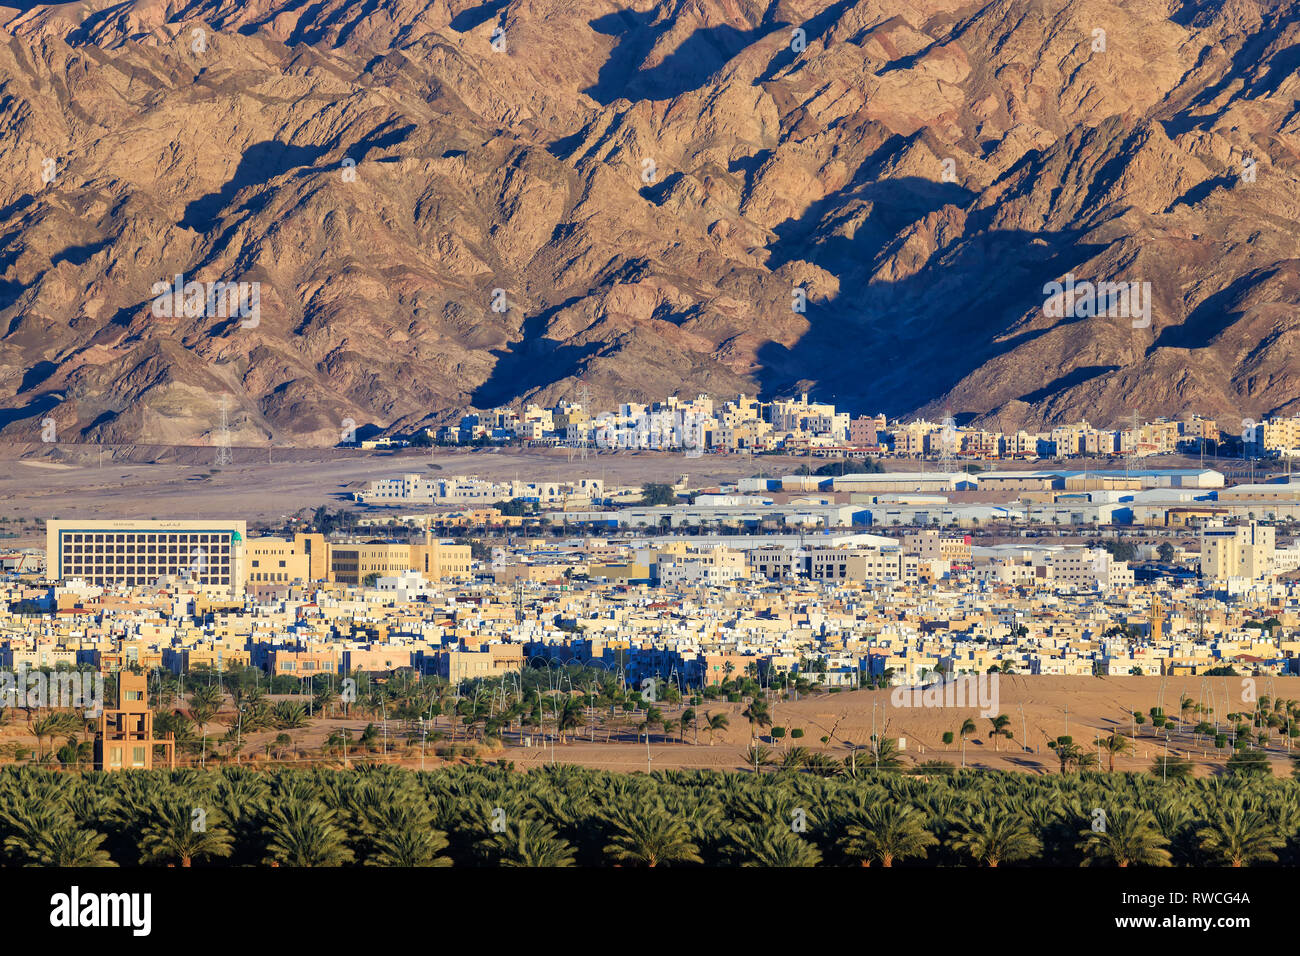 Eilat, ISRAEL-February 24, 2019: Israir Airlines ATR 72-200 at old Eilat international Airport. Stock Photo